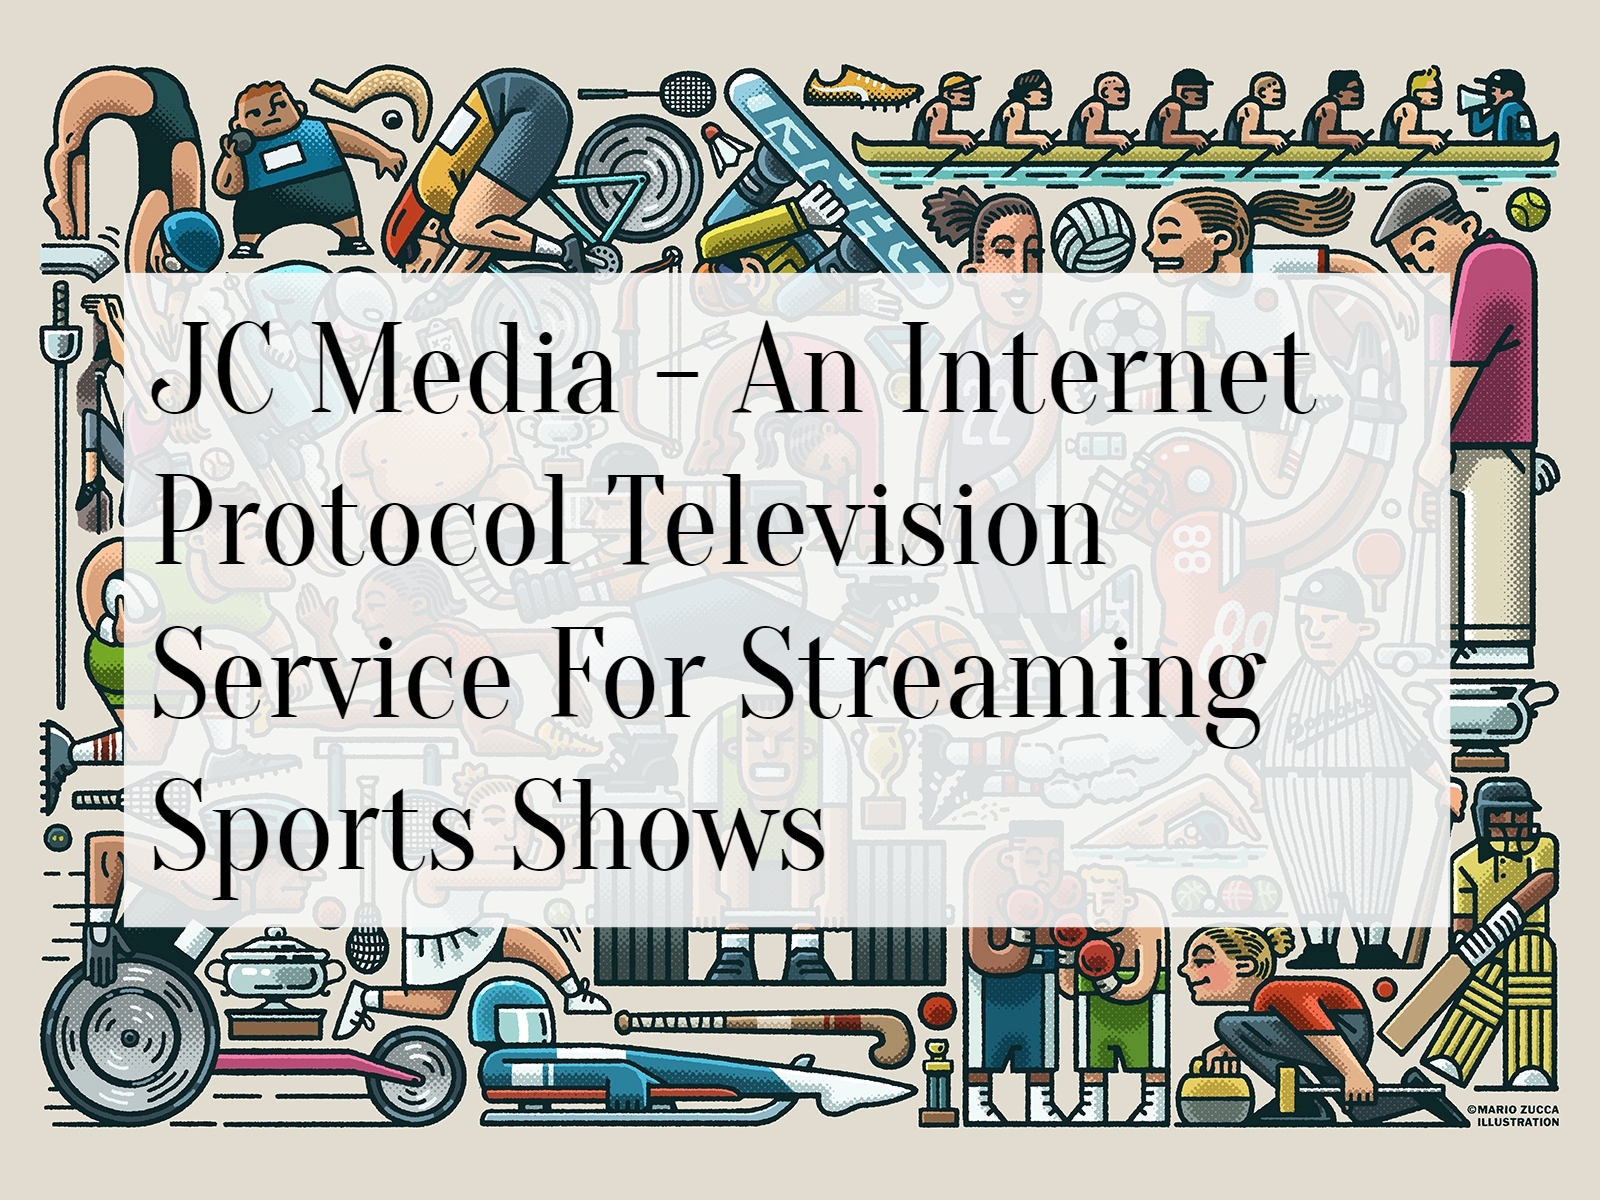 JC Media - An Internet Protocol Television Service For Streaming Sports Shows